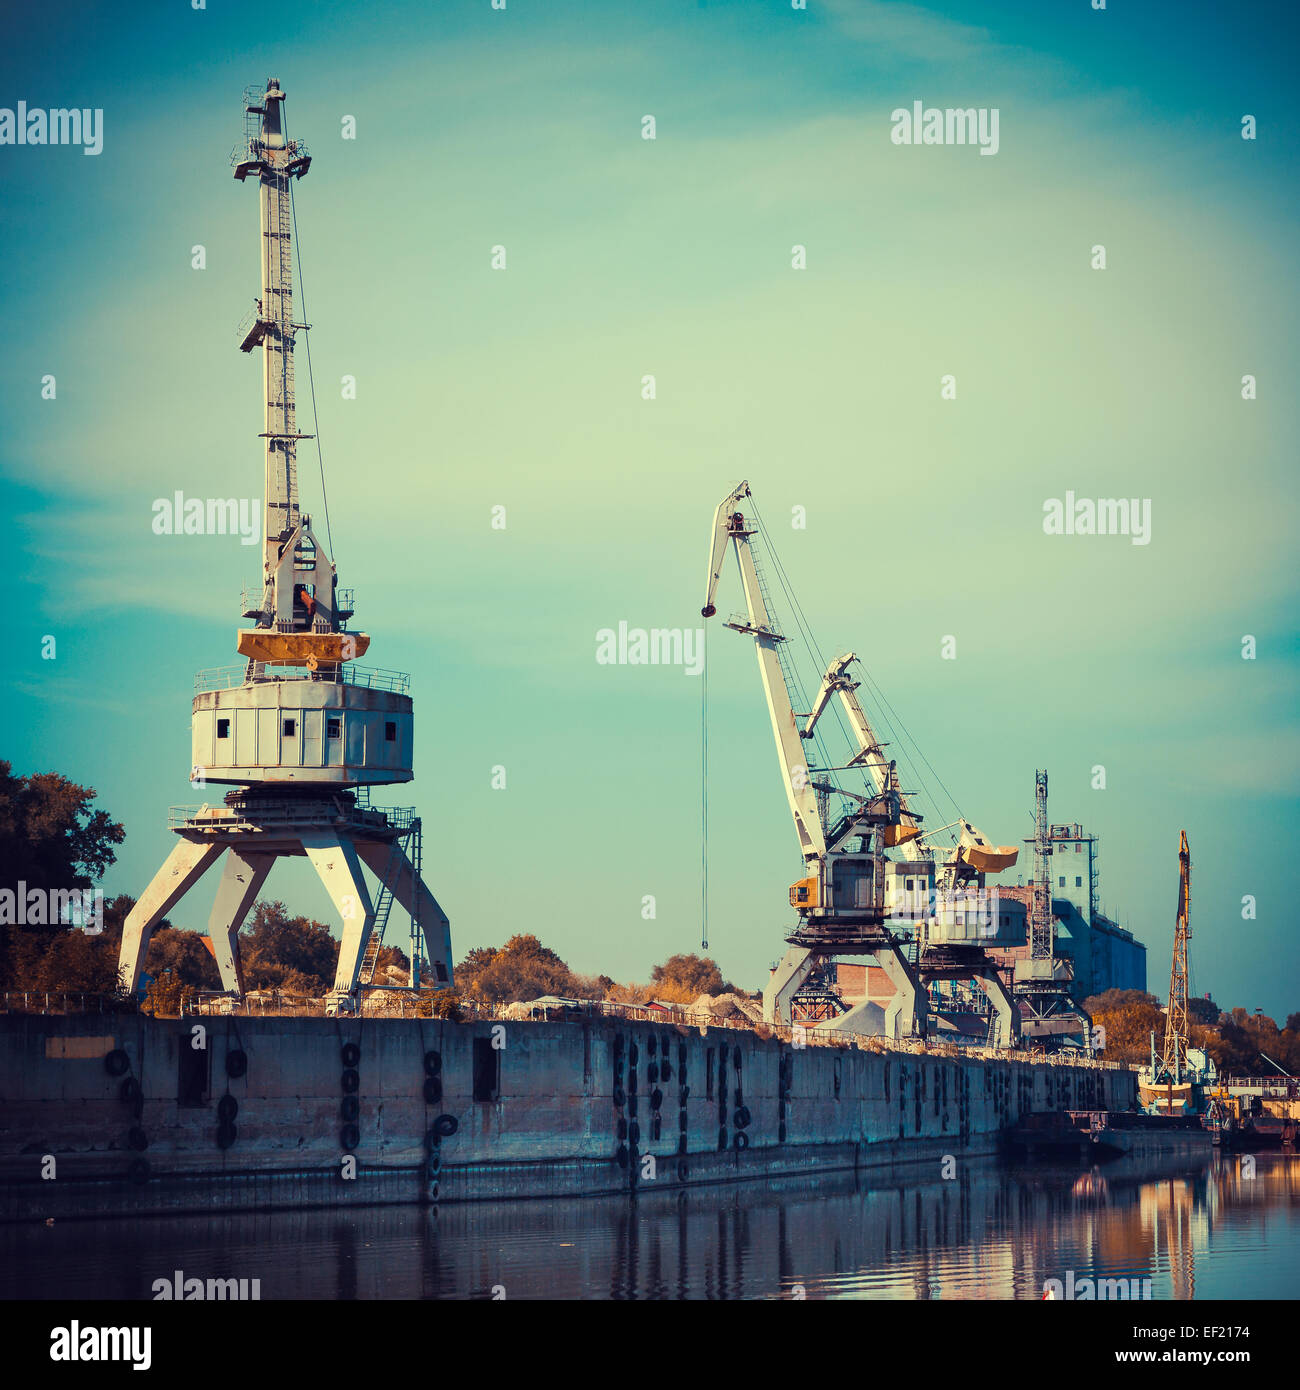 Working cranes for cargo at the shipyard docks in river port, vintage stylized. Stock Photo